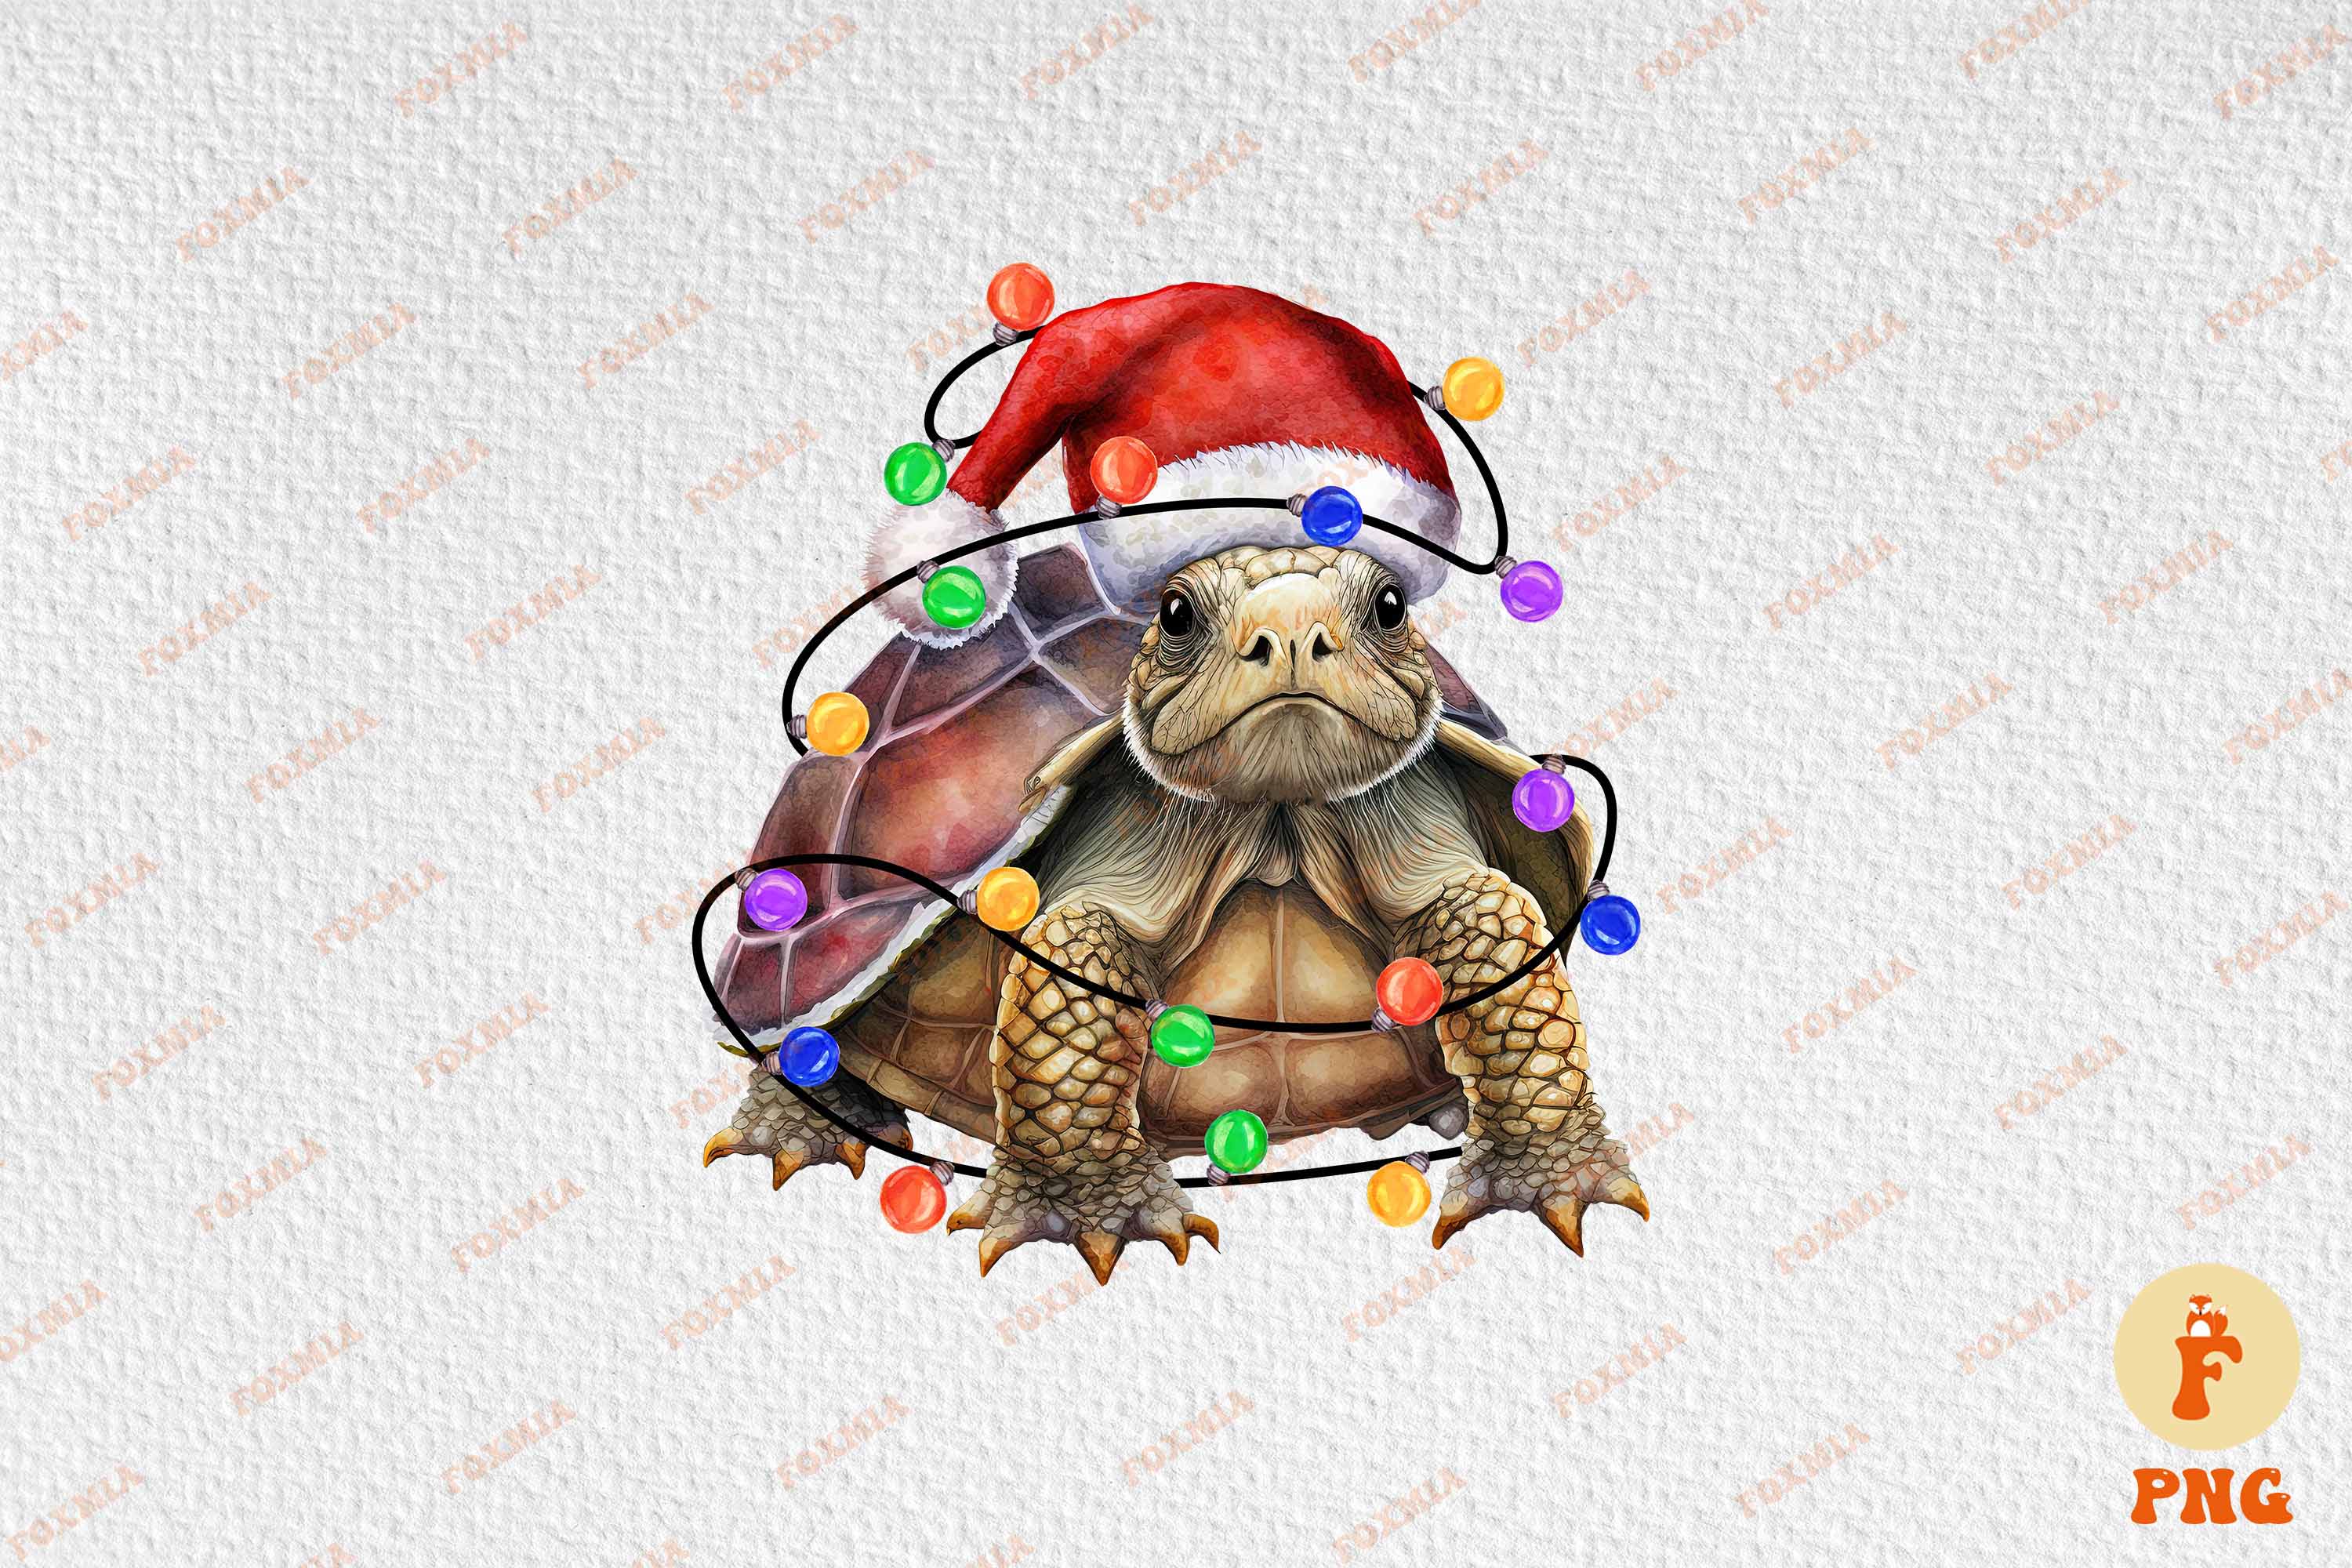 Adorable image of a turtle wearing a santa hat.